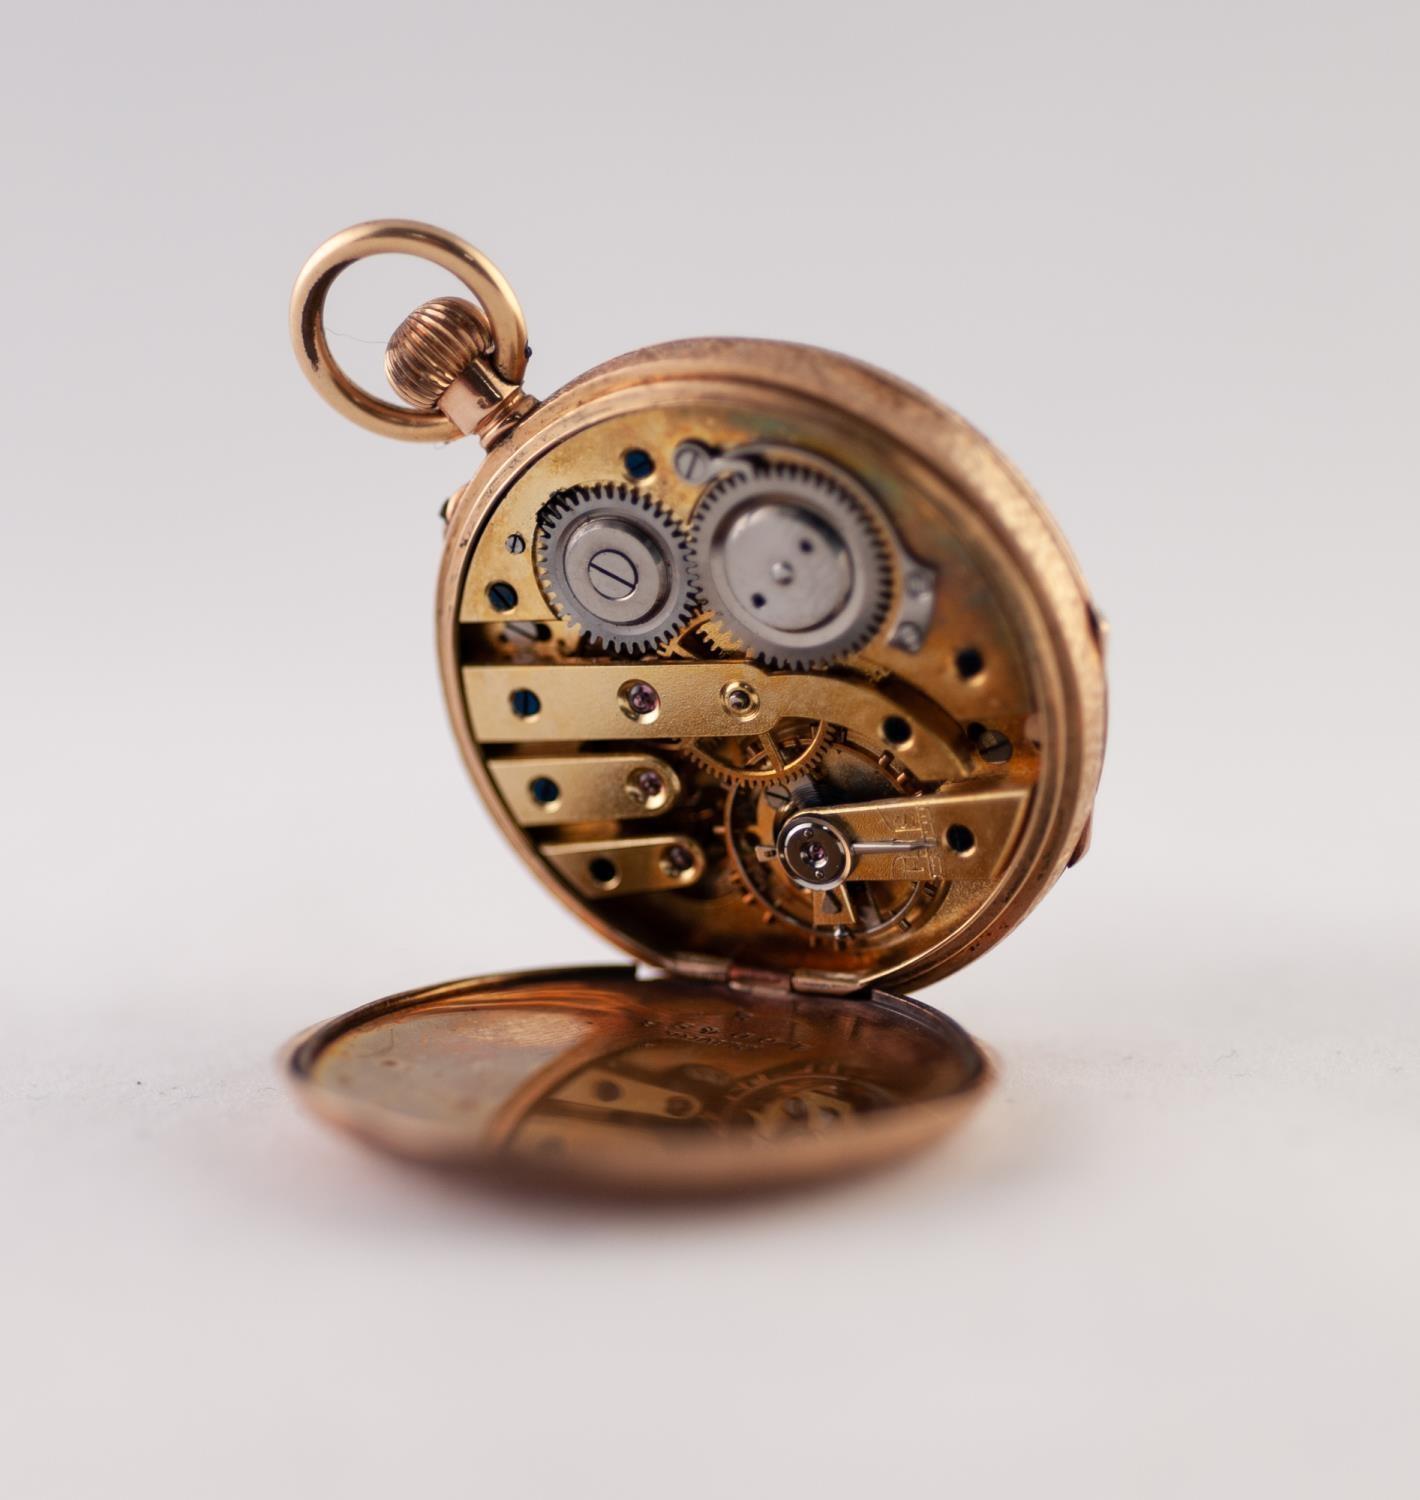 14k GOLD LADY'S POCKET WATCH with keyless movement, gold roman dial with floral engraved centre, - Image 2 of 2